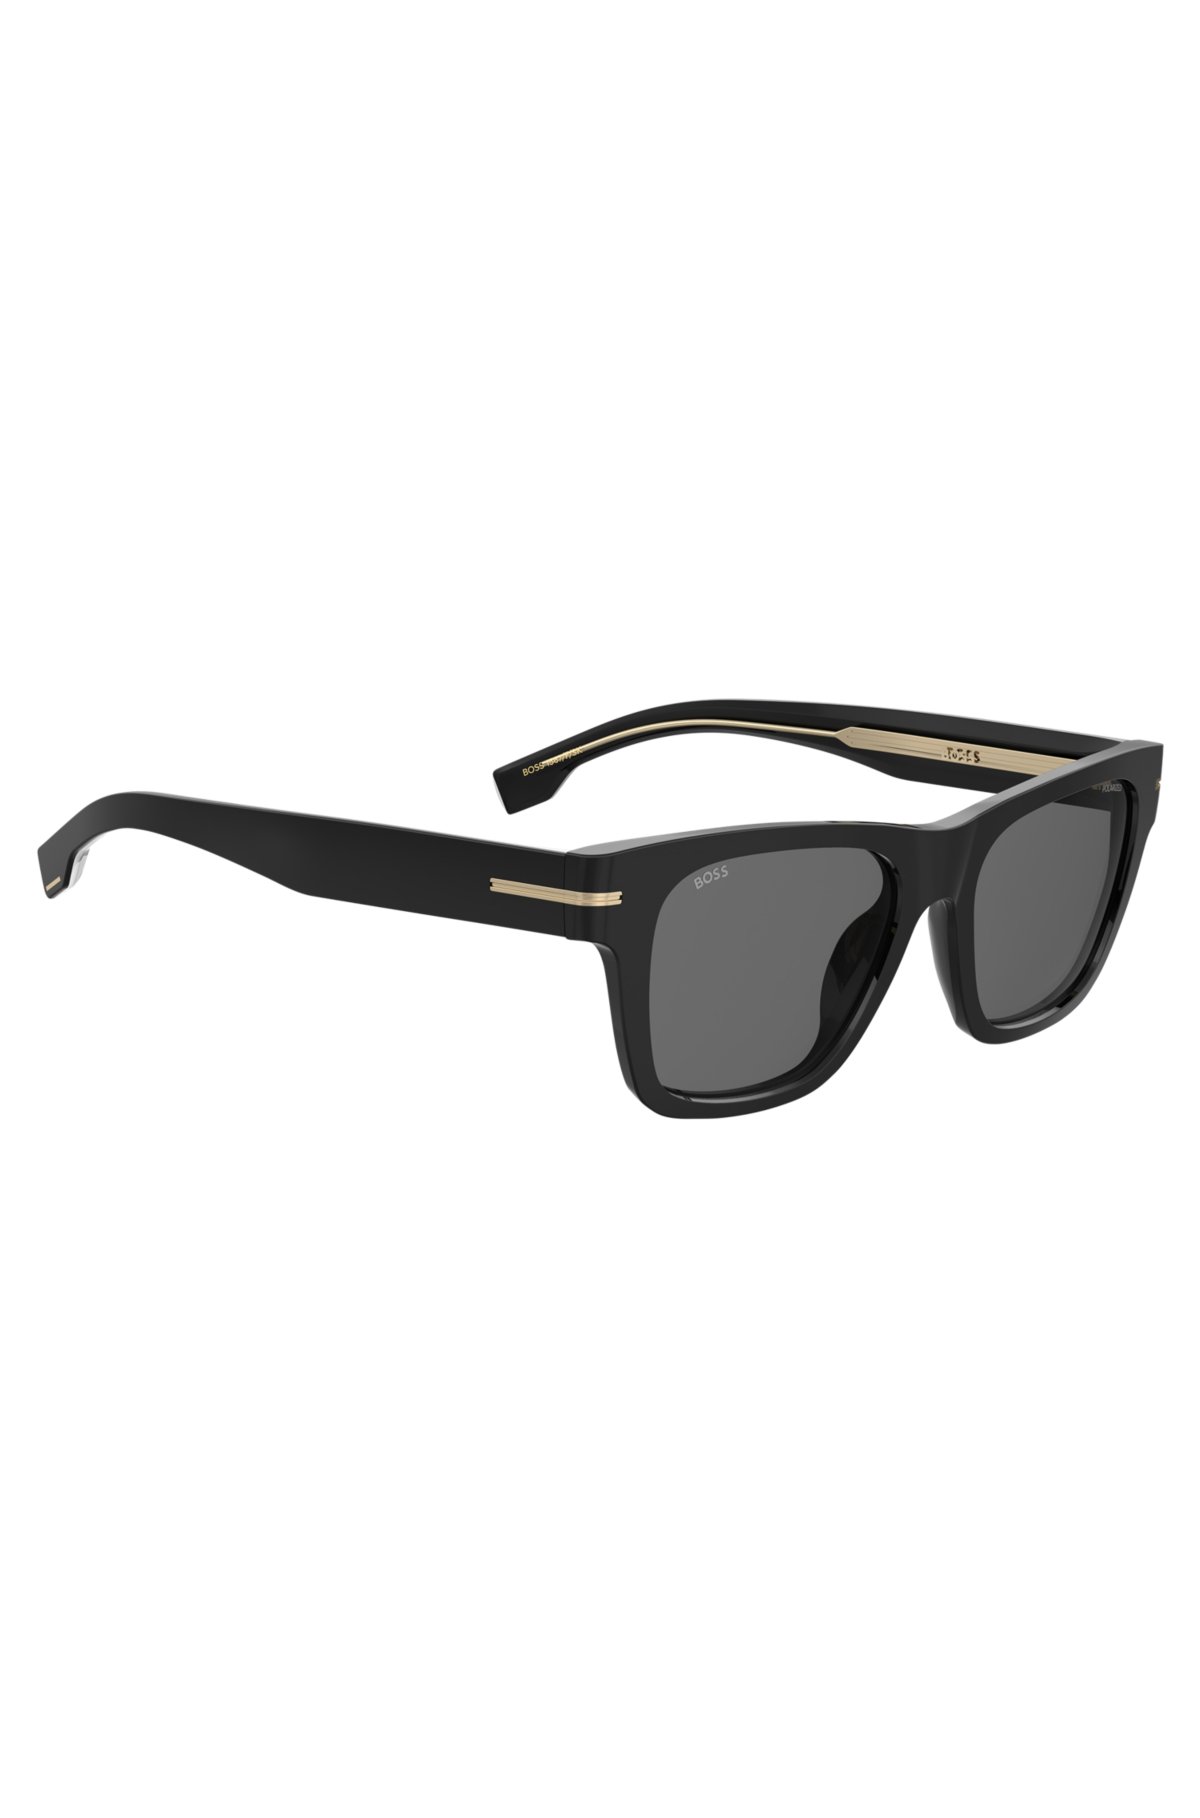 Black sunglasses with gold-tone details